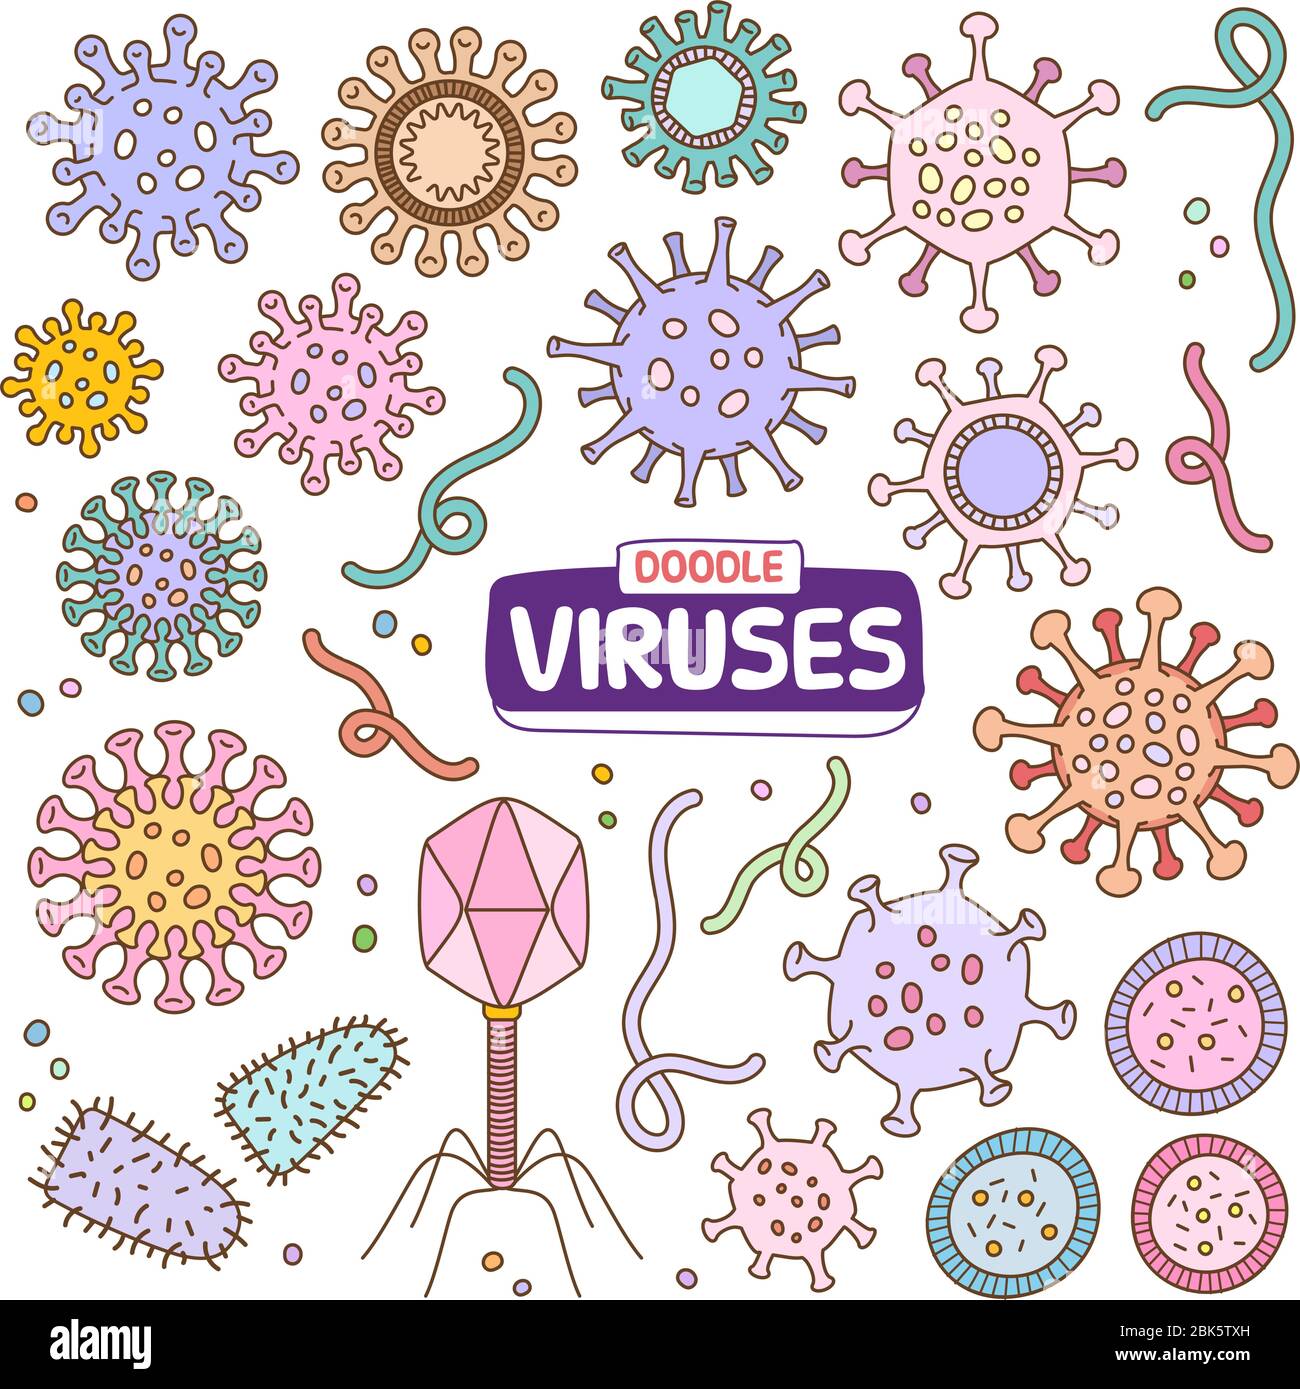 Set of viruses vector cartoon illustration elements. Various objects of hand-drawn viruses in doodle color. Stock Vector